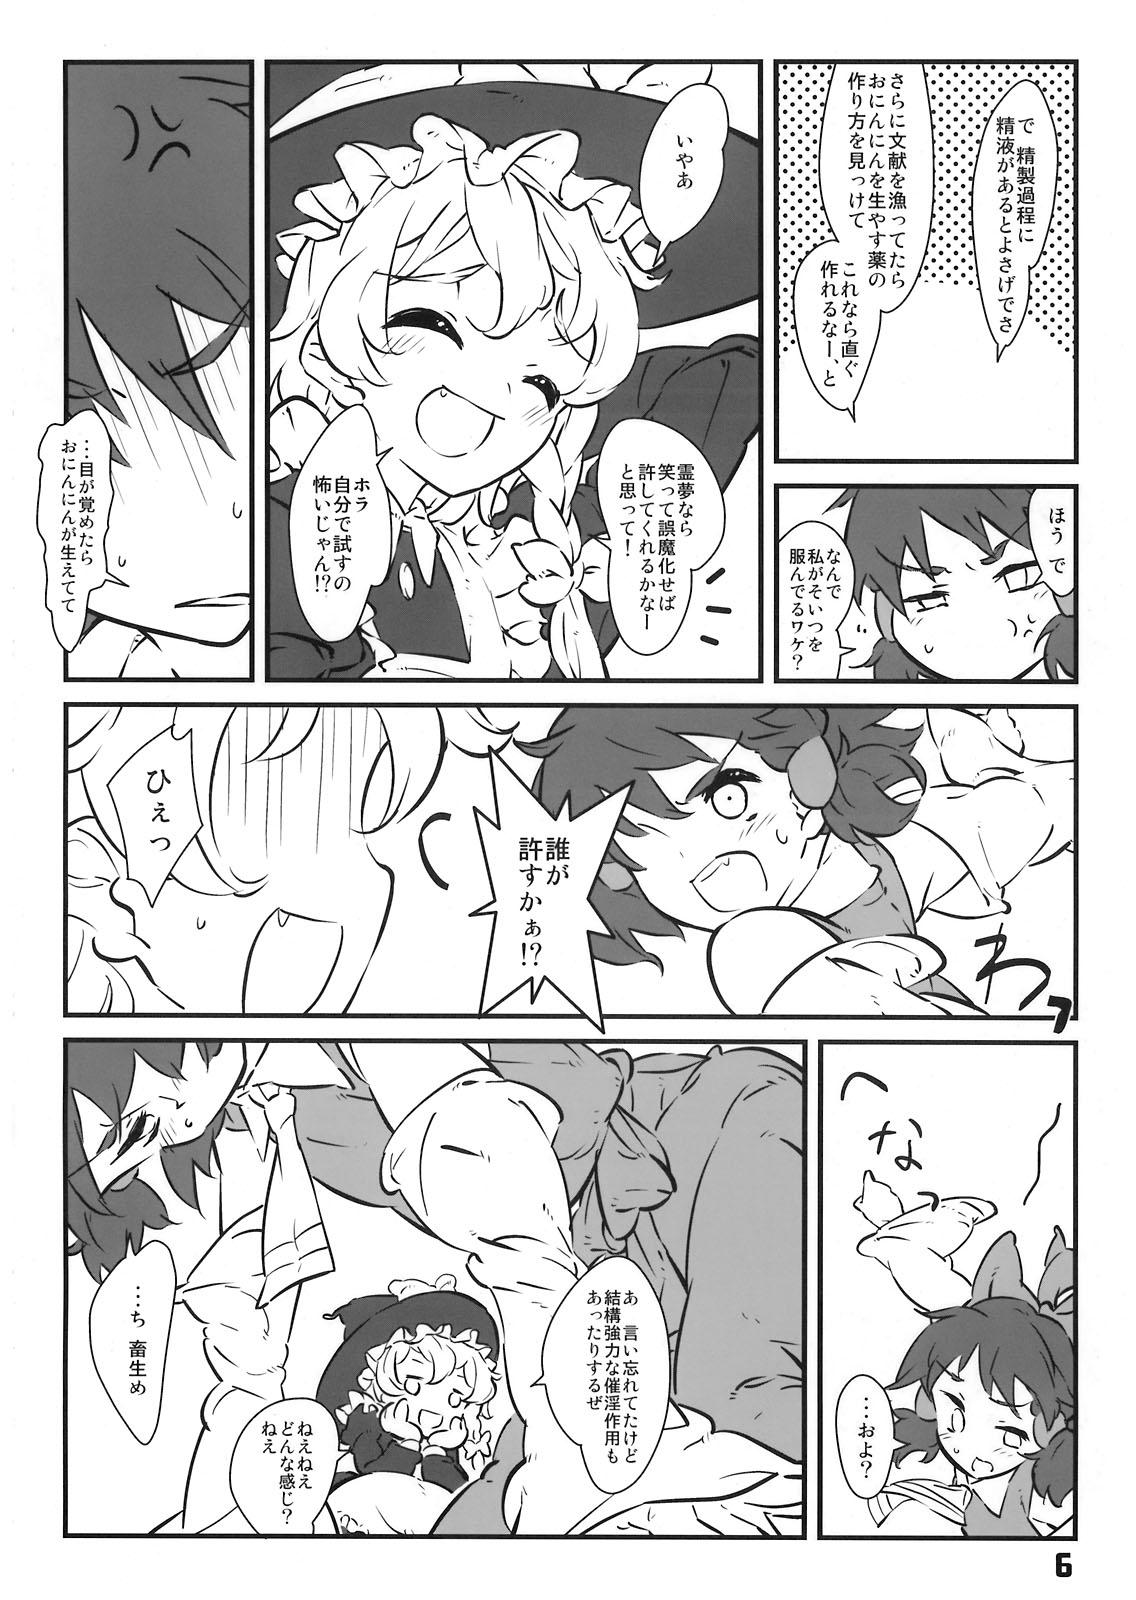 Macho Majo no Harigata - Witch's Dildo - Touhou project Nut - Page 6